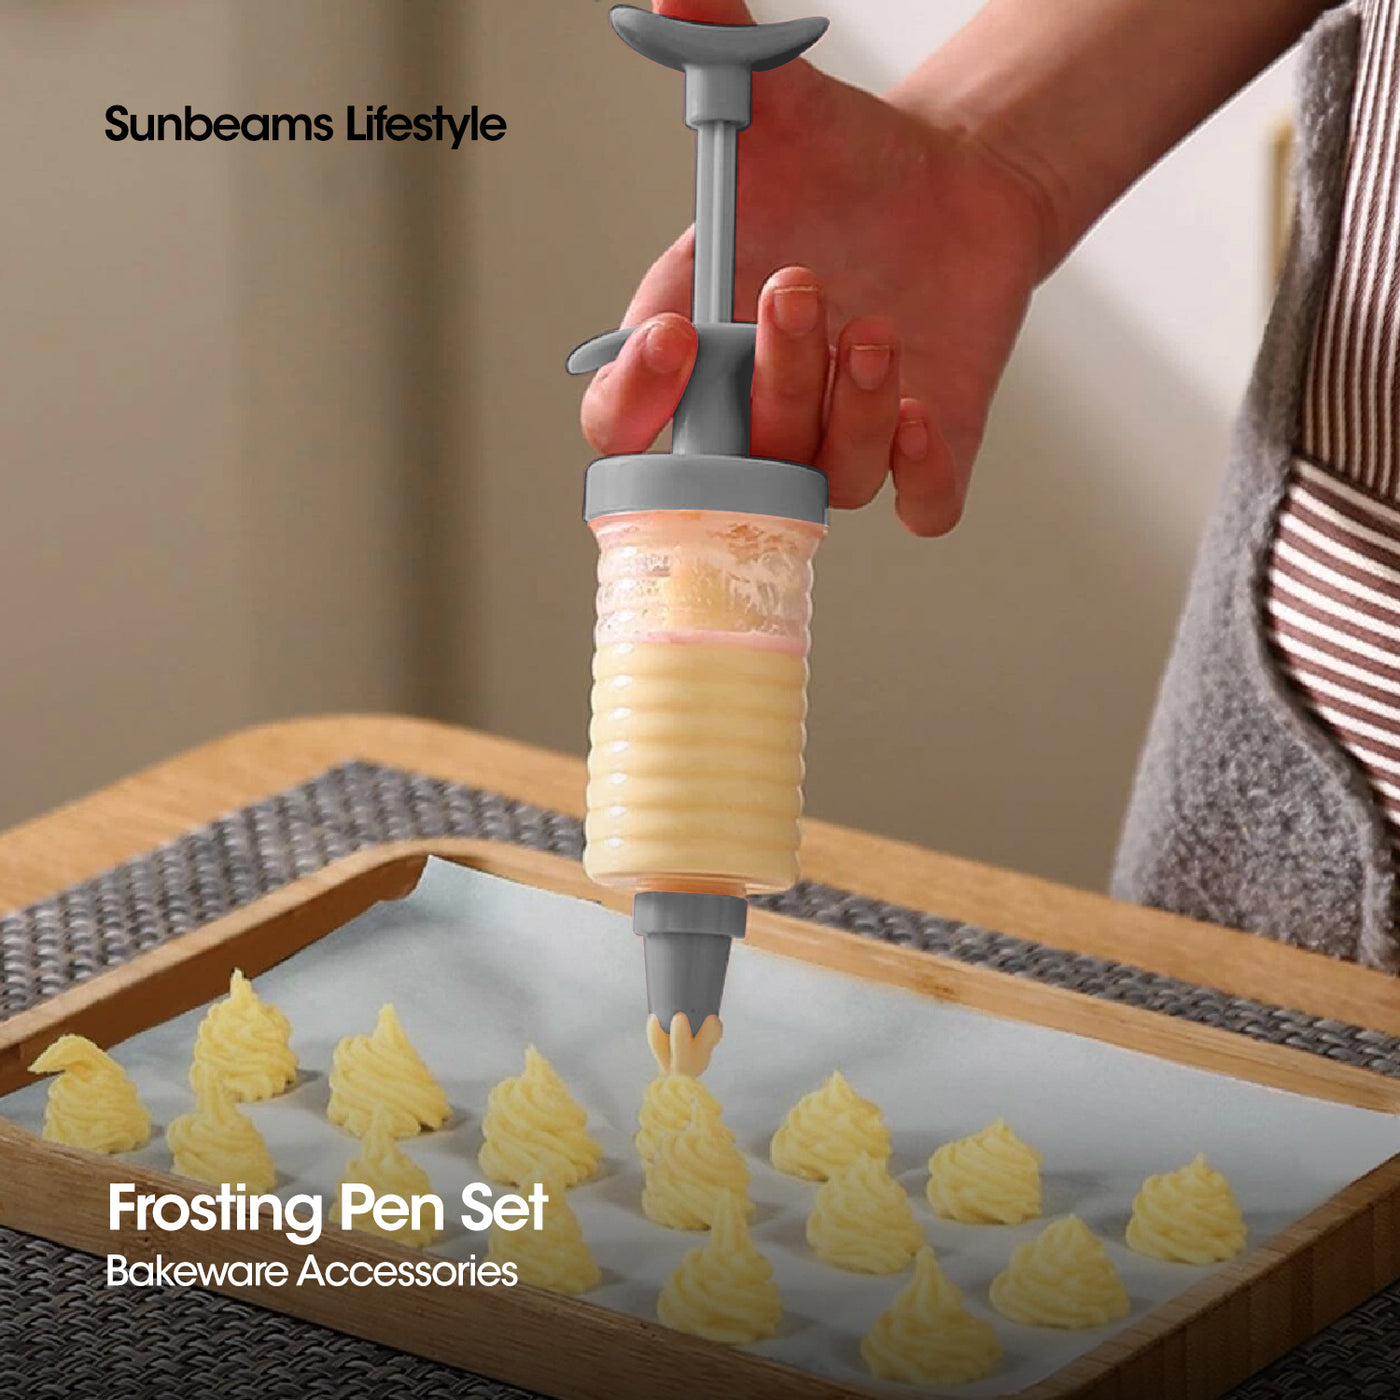 SLIQUE Premium Frosting Pen, Cake Decorating & Icing Tool Set of 7 Baking Accessories  Amazing Gift Idea For Any Occasion!